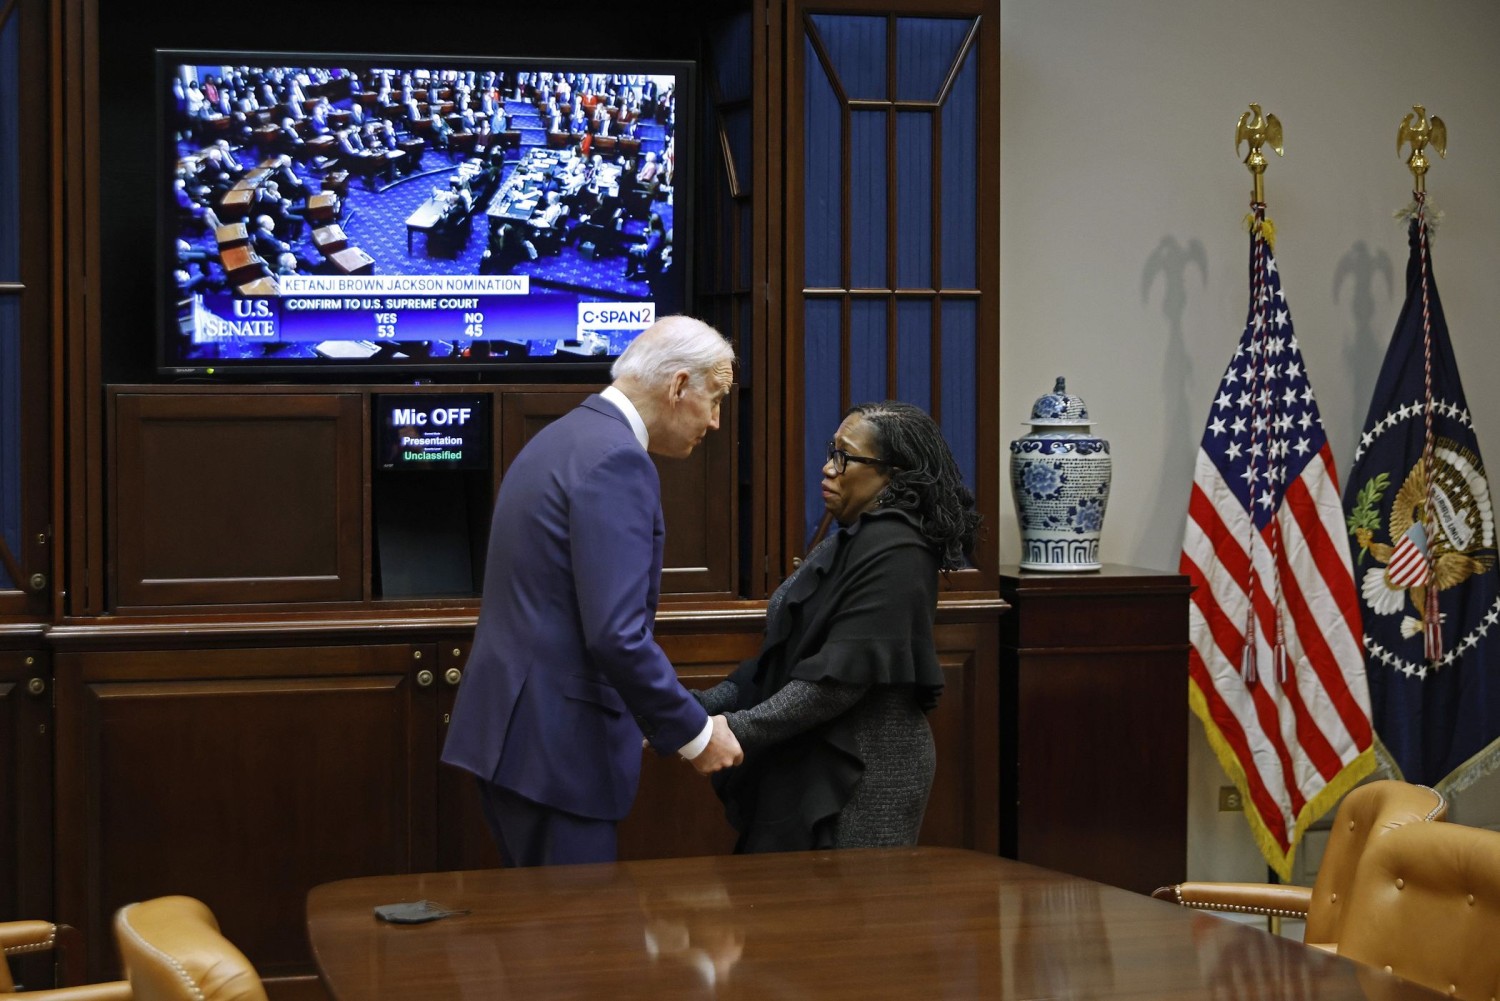 President Biden congratulated Judge Jackson after the Senate voted to confirm her. PHOTO: CHIP SOMODEVILLA/GETTY IMAGES